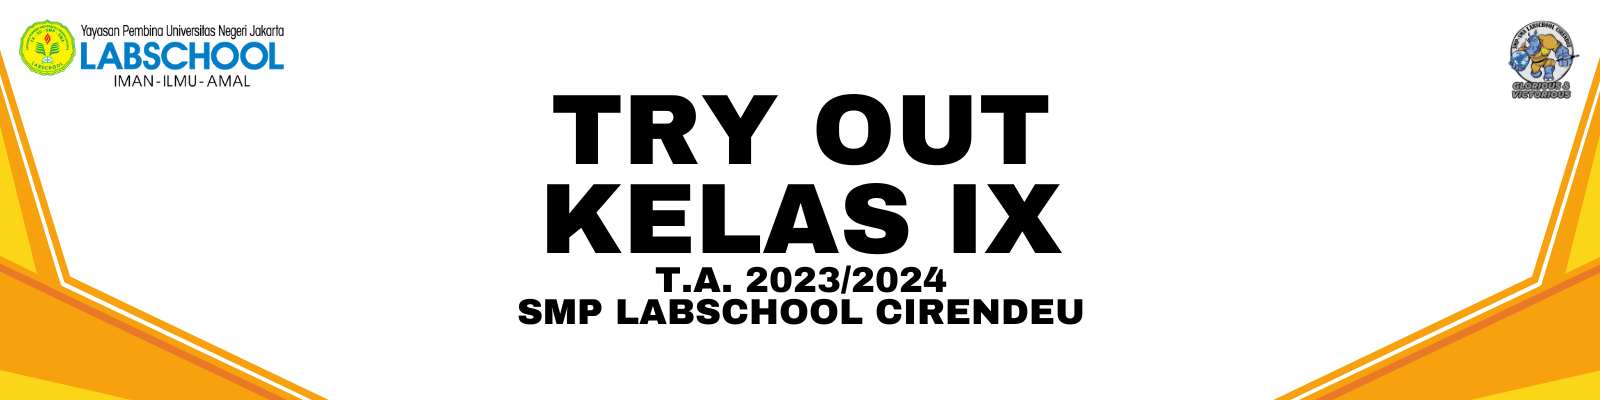 Try Out T.A. 2023/2024